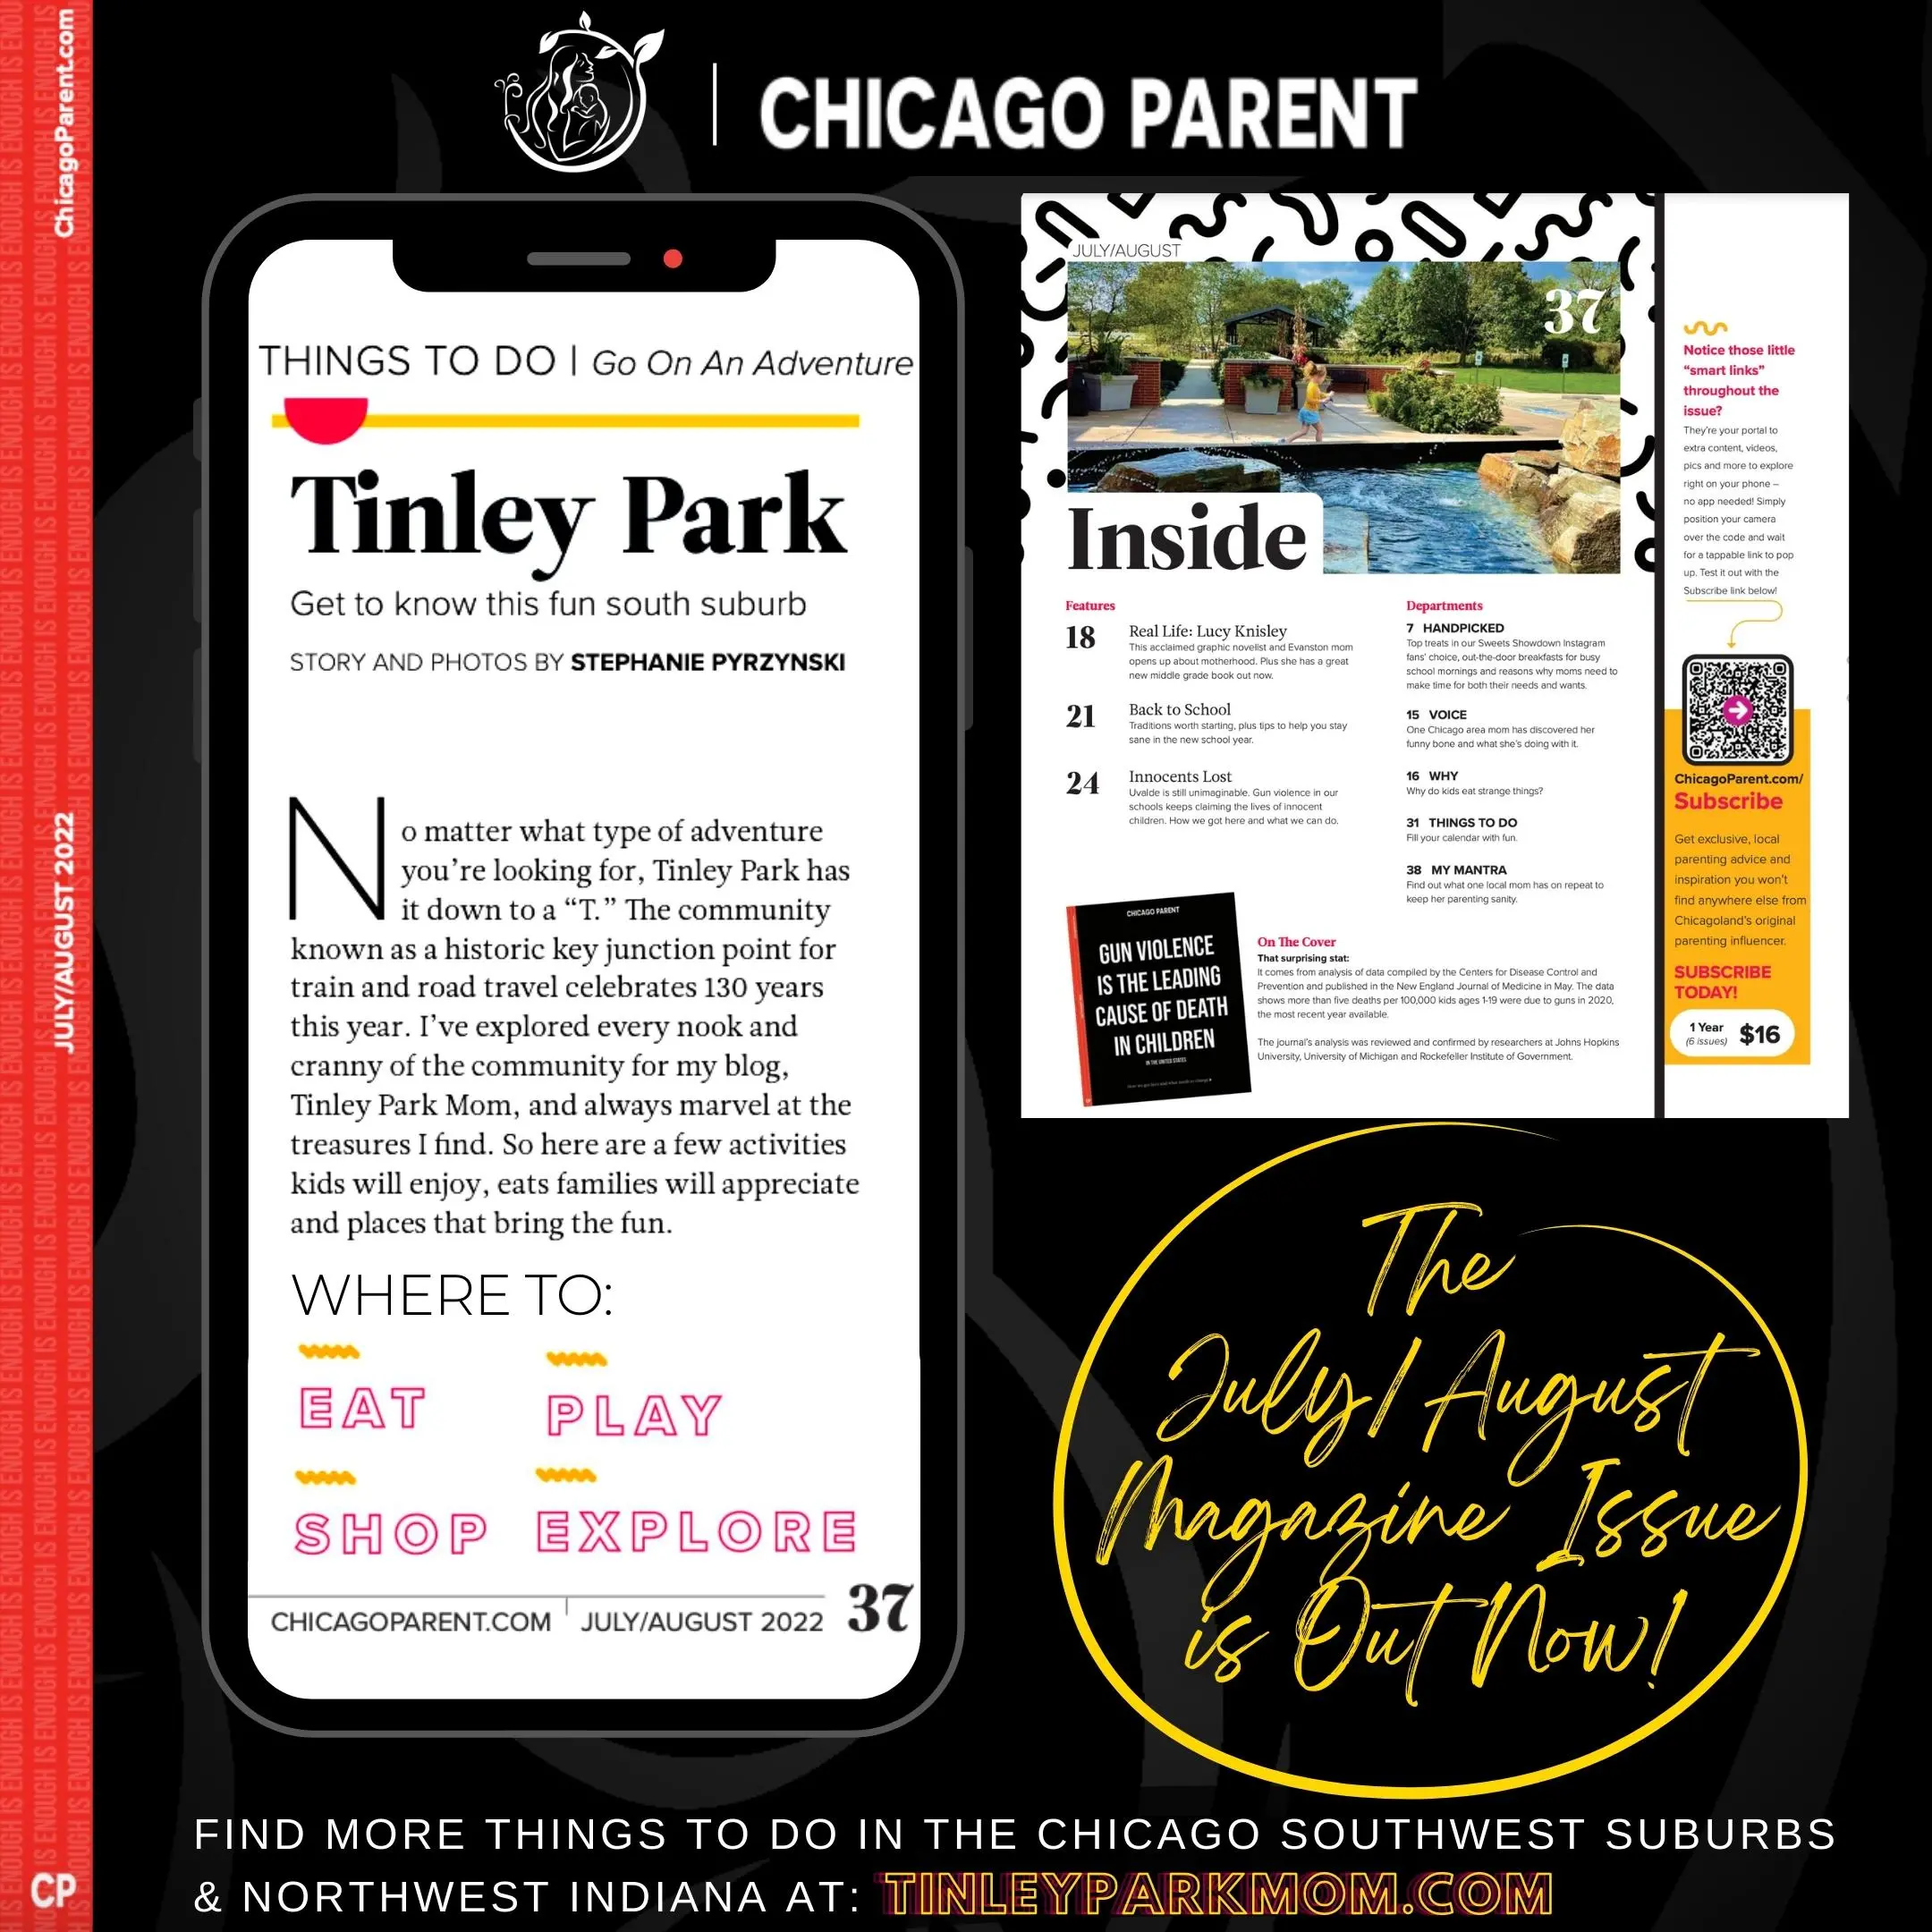 Family Neighborhood Guide to Tinley Park: New Article In Chicago Parent Magazine